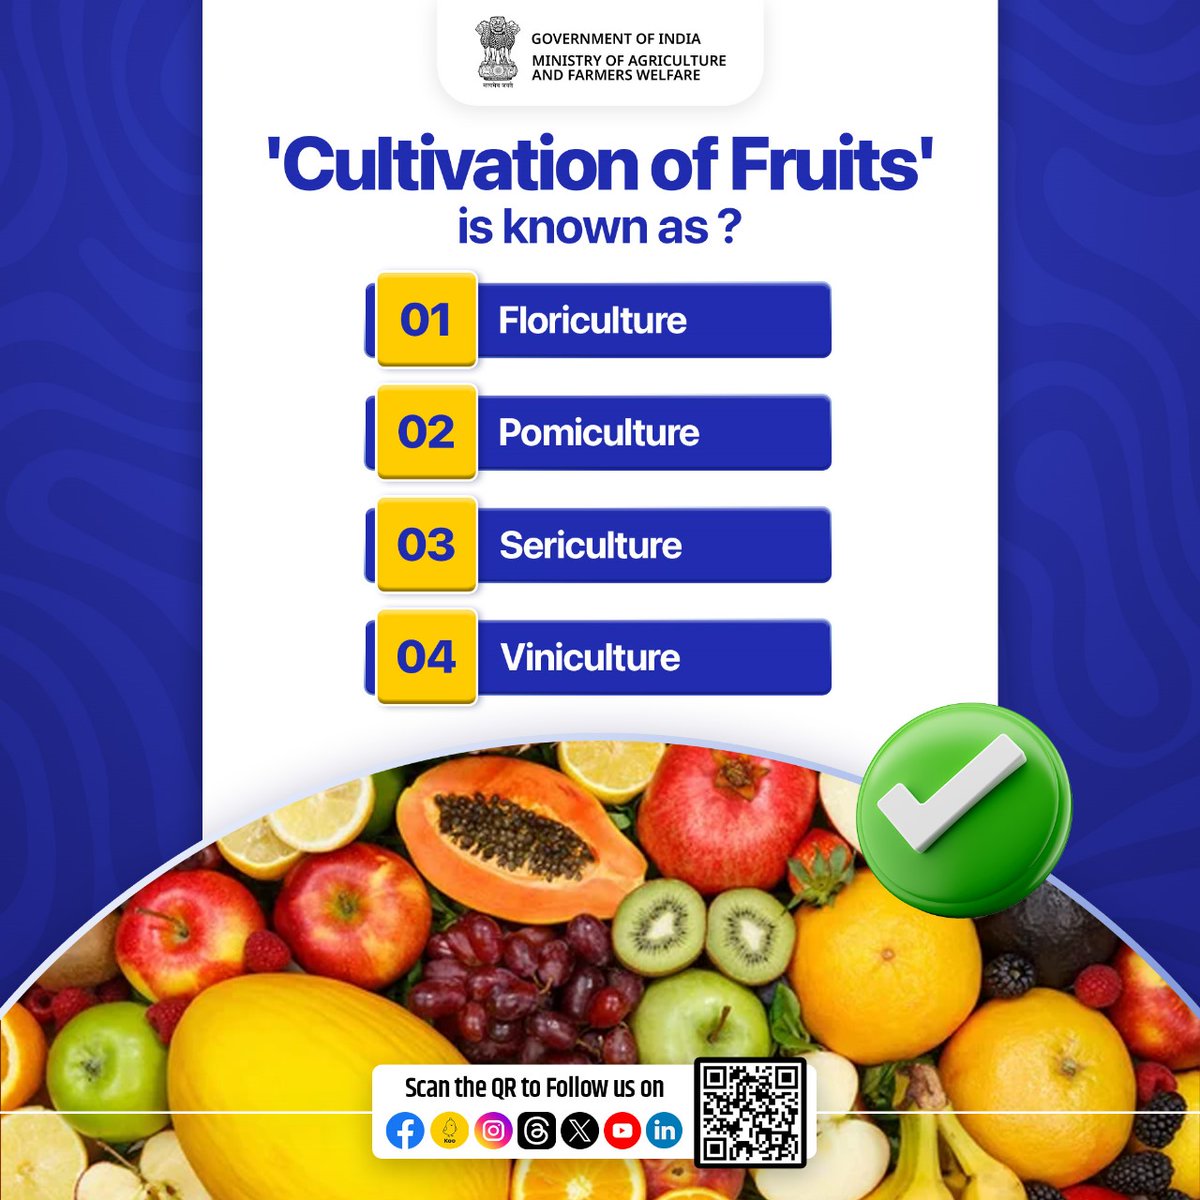 Take part in the agriculture quiz and test your knowledge!
.
Cultivation of Fruits' is known as ?

Please share your answer in the comments.

#agrigoi #agriquiz #QuizOfTheDay #agriculture #fruits